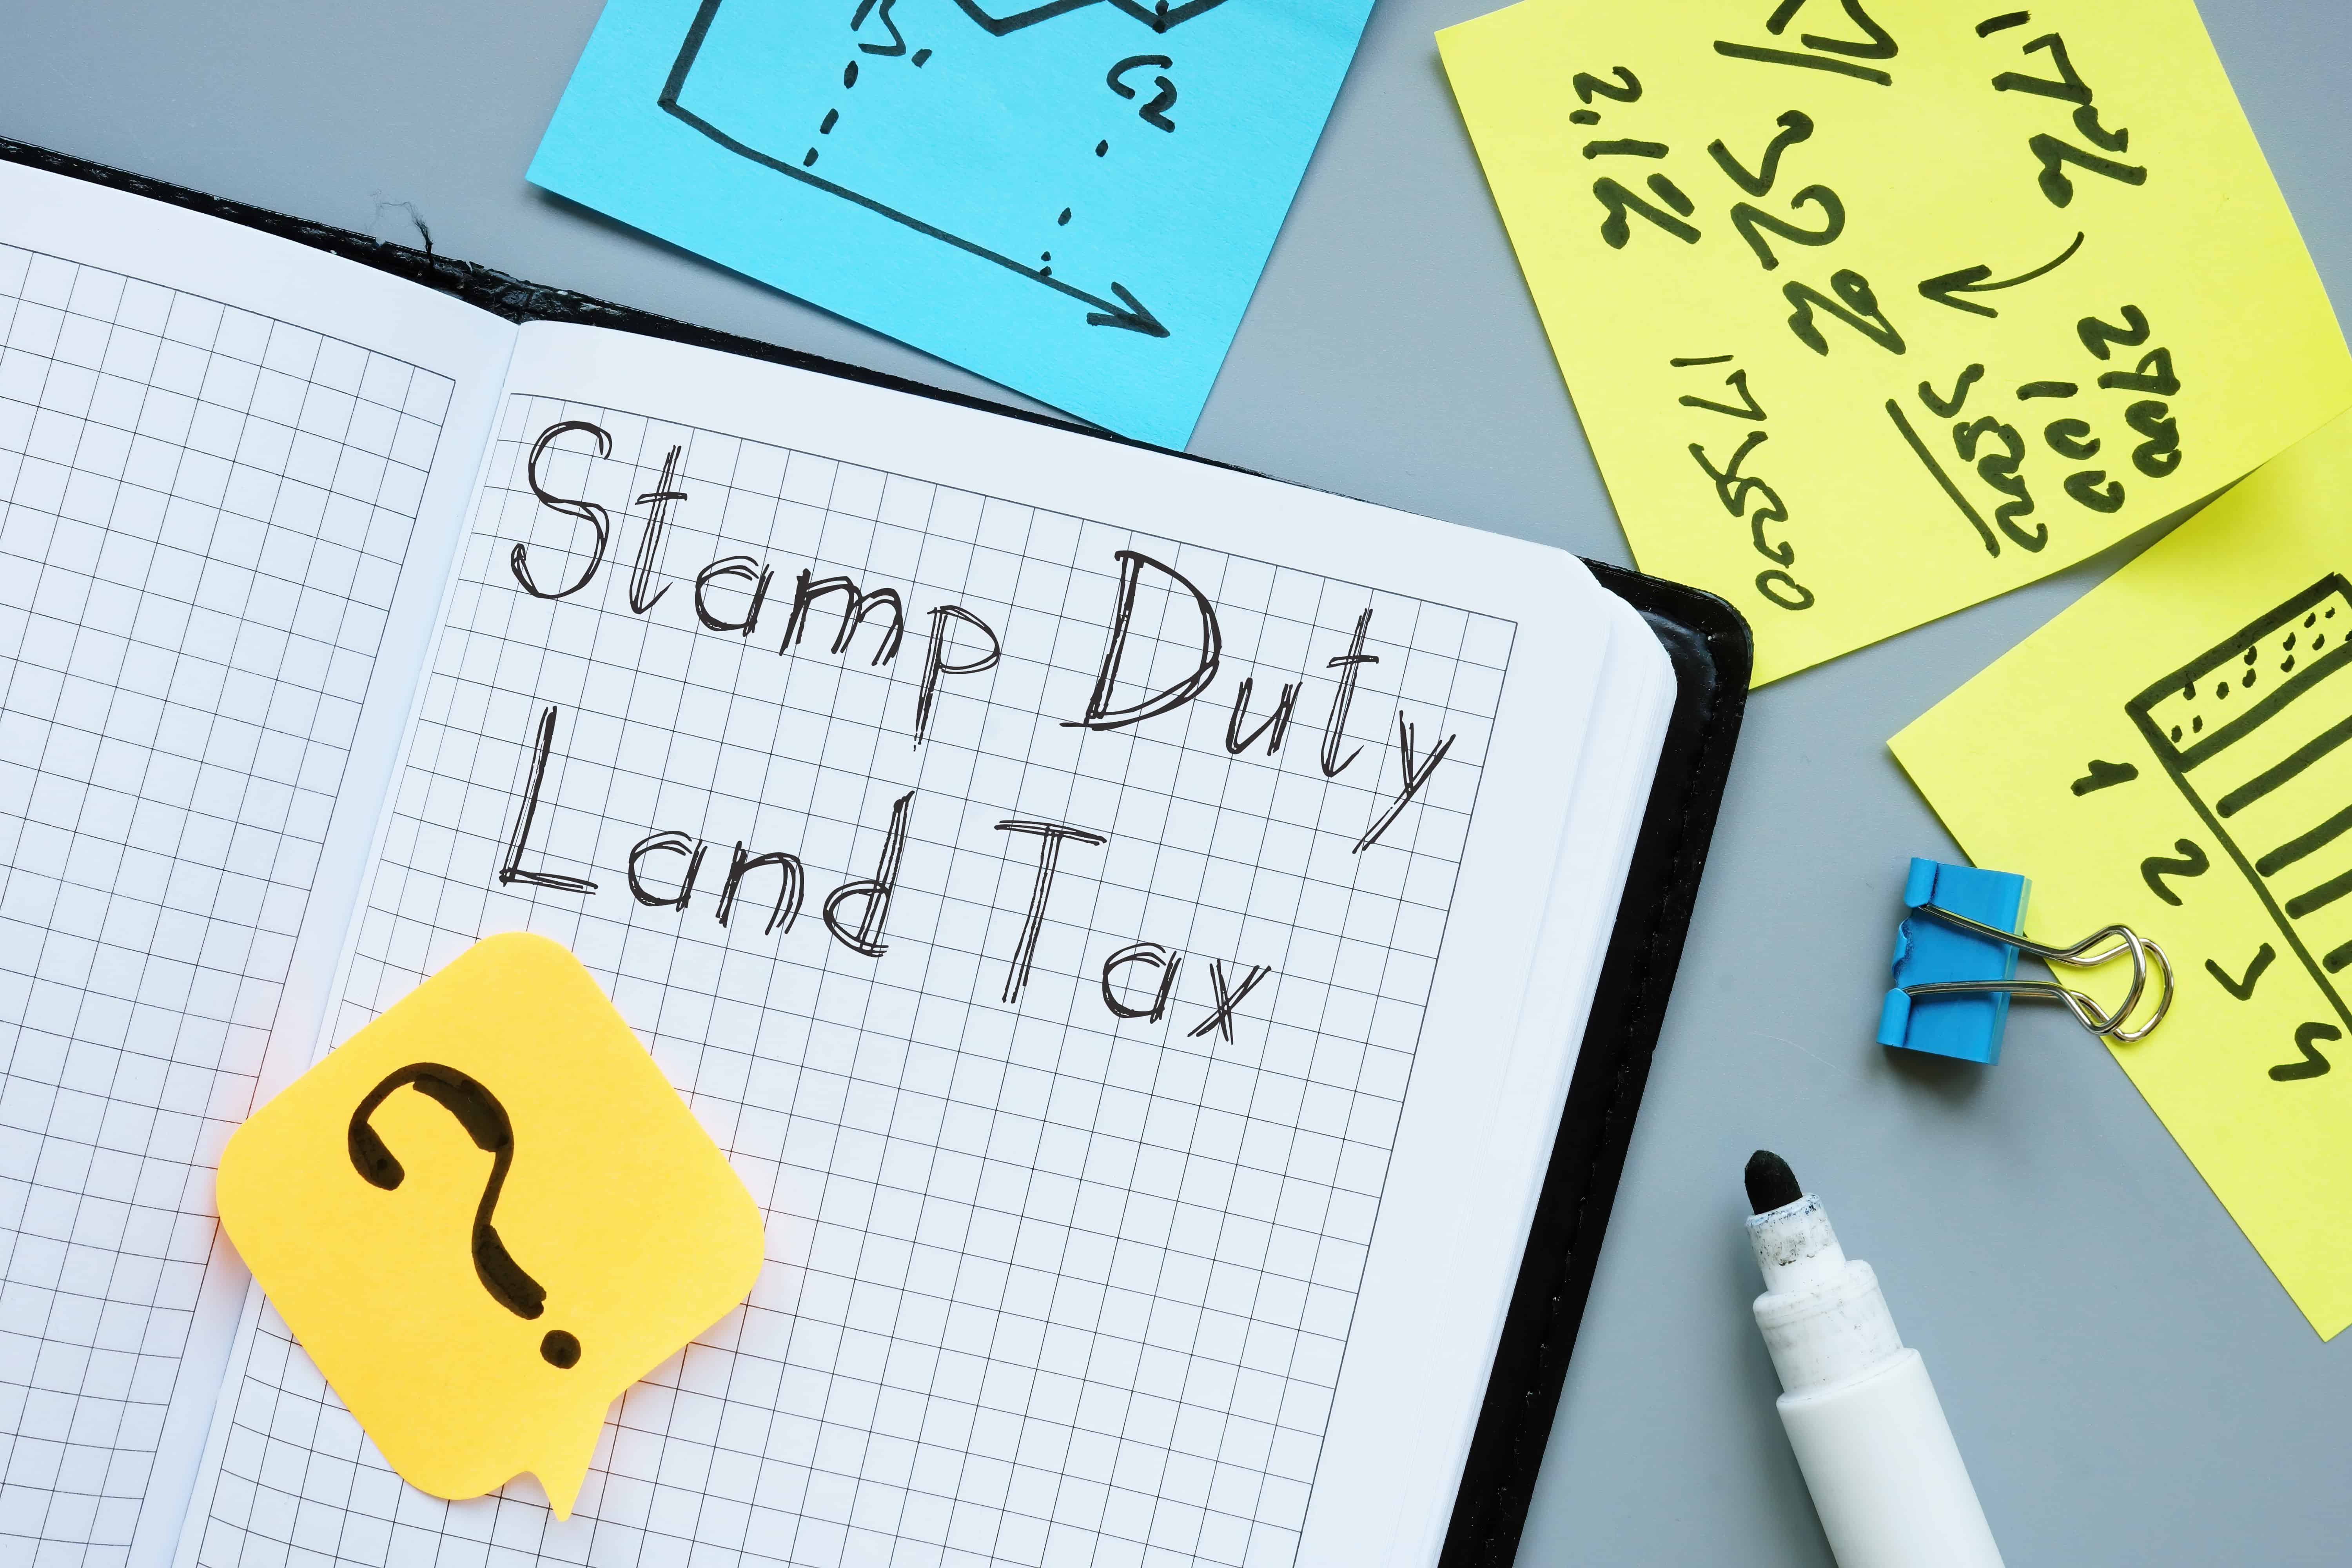 Stamp duty has cost buyers £4.2bn in 2021